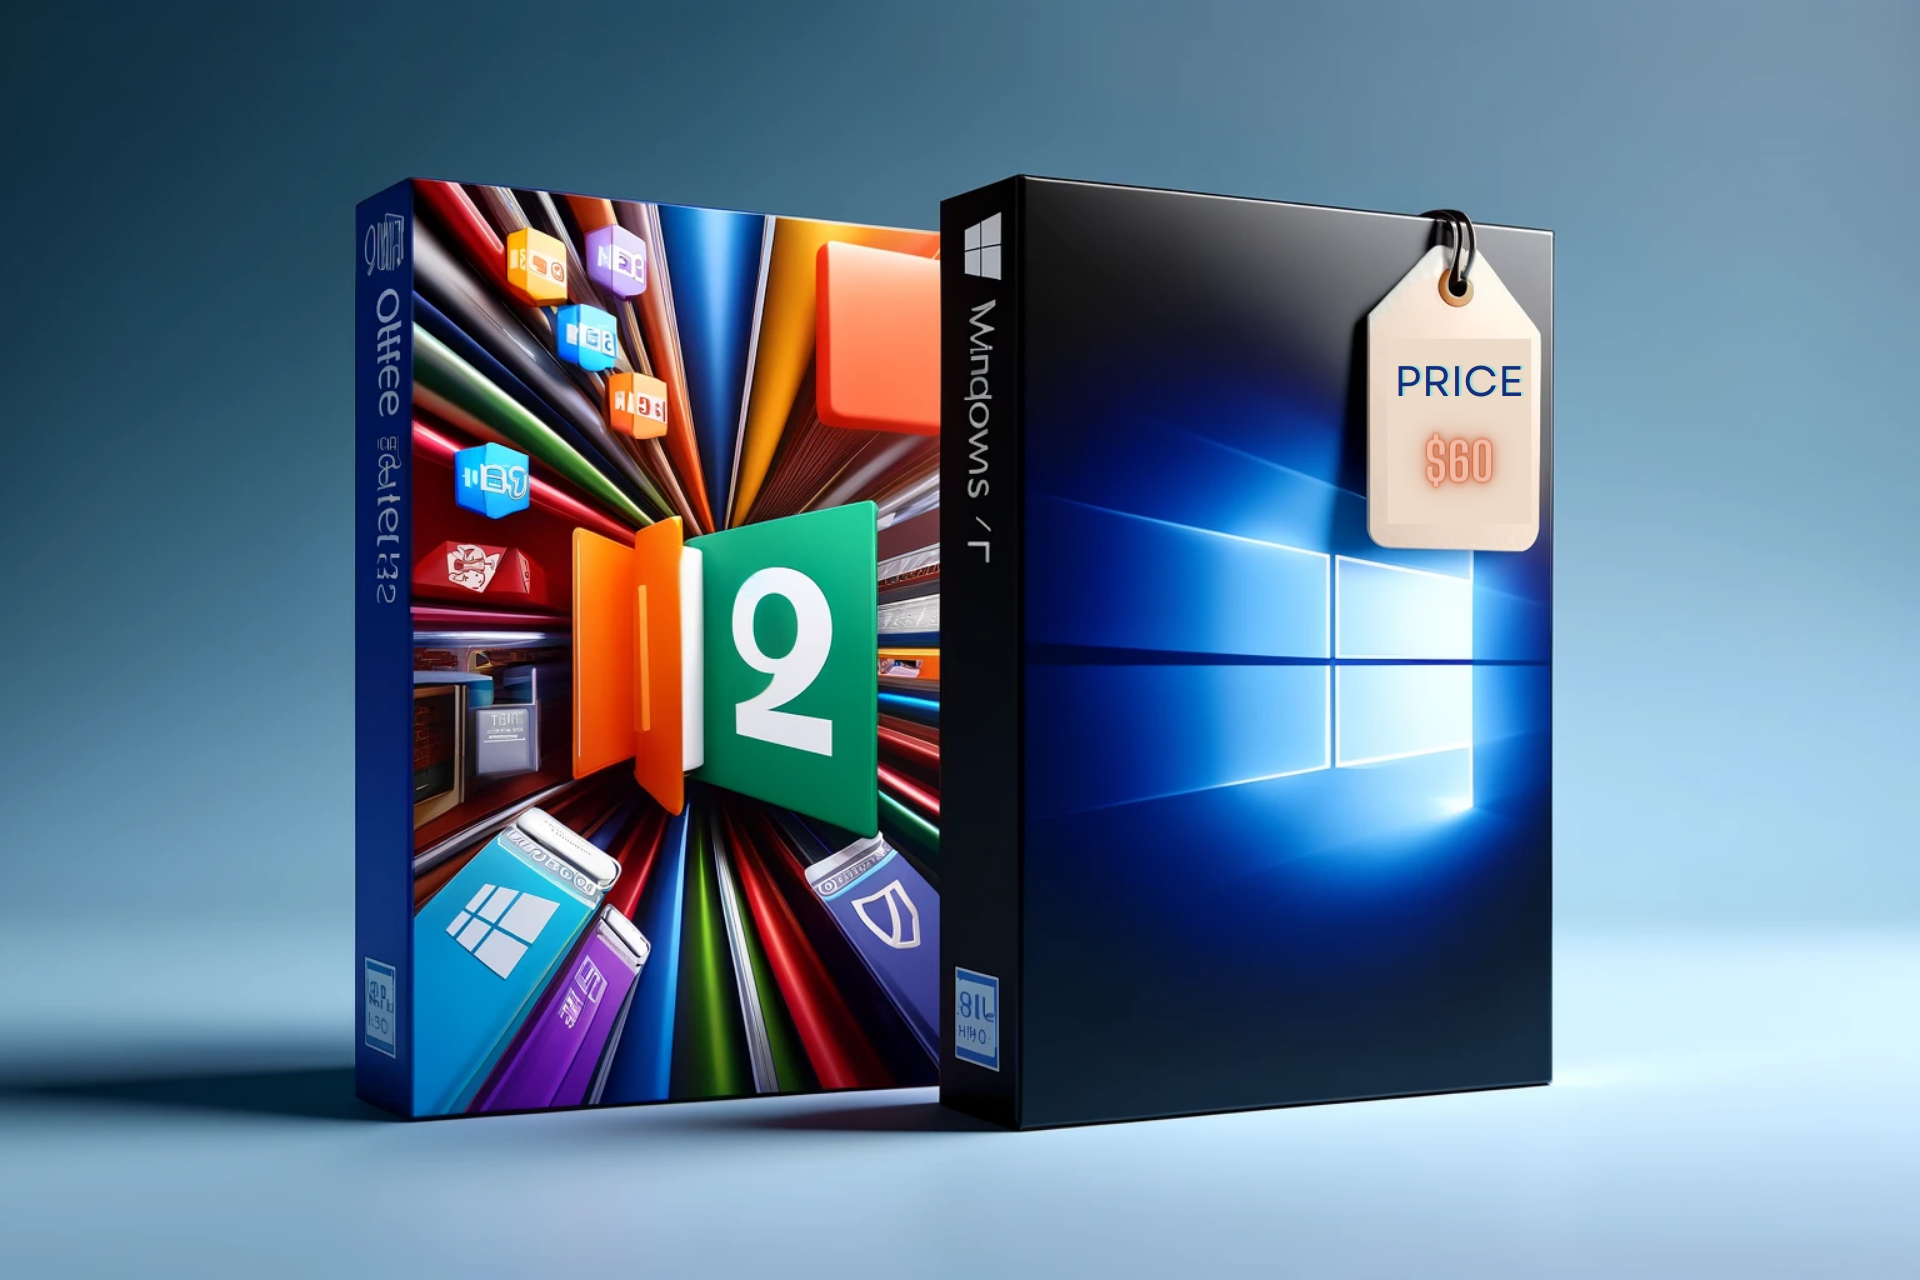 This bundle of Microsoft Office and Windows 11 can breathe new life into your old PC